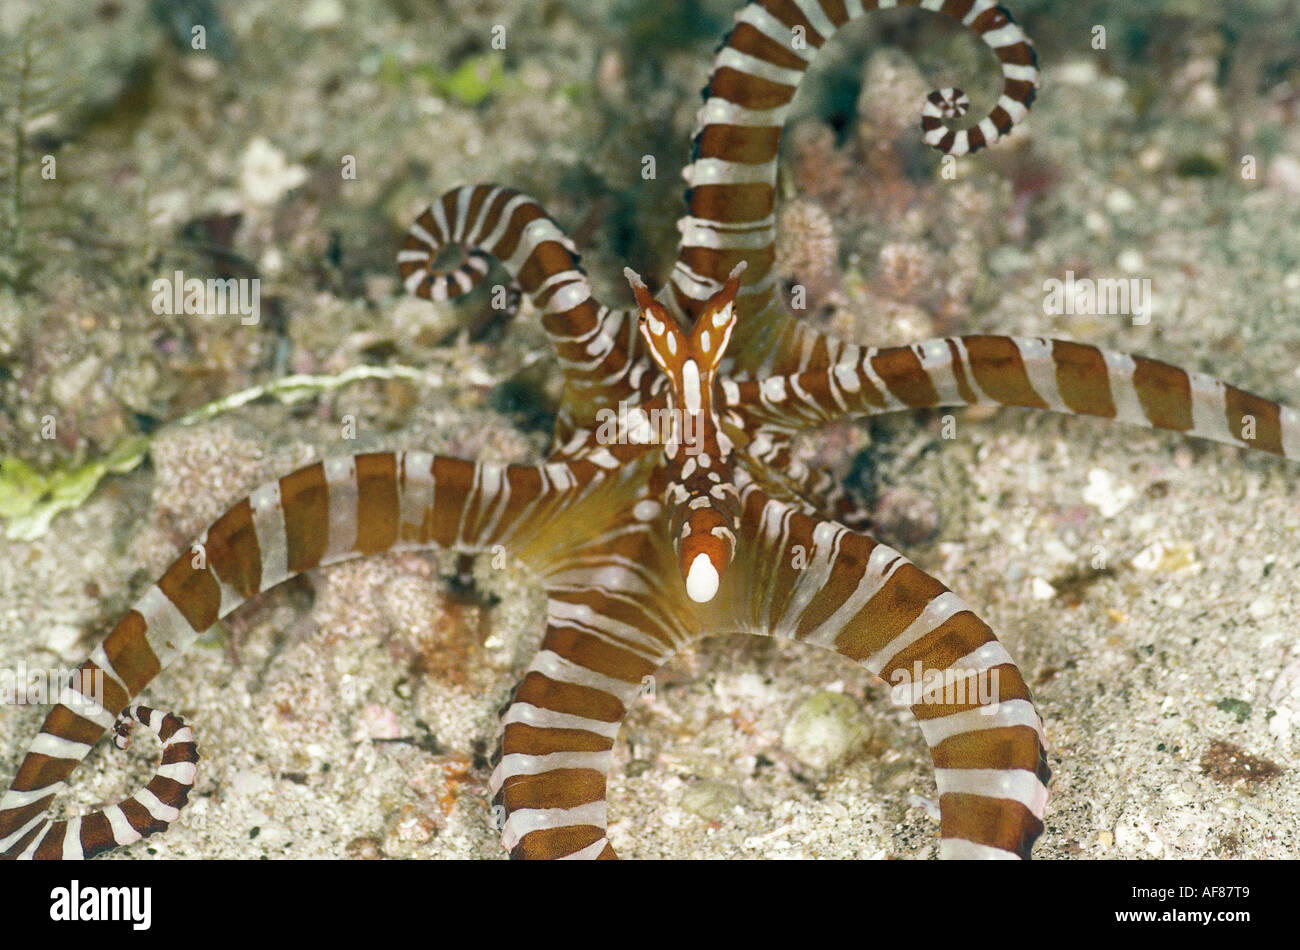 An ornate (mimic) octopus (Octopus berrima) displays on the sandy sea-bed. Stock Photo